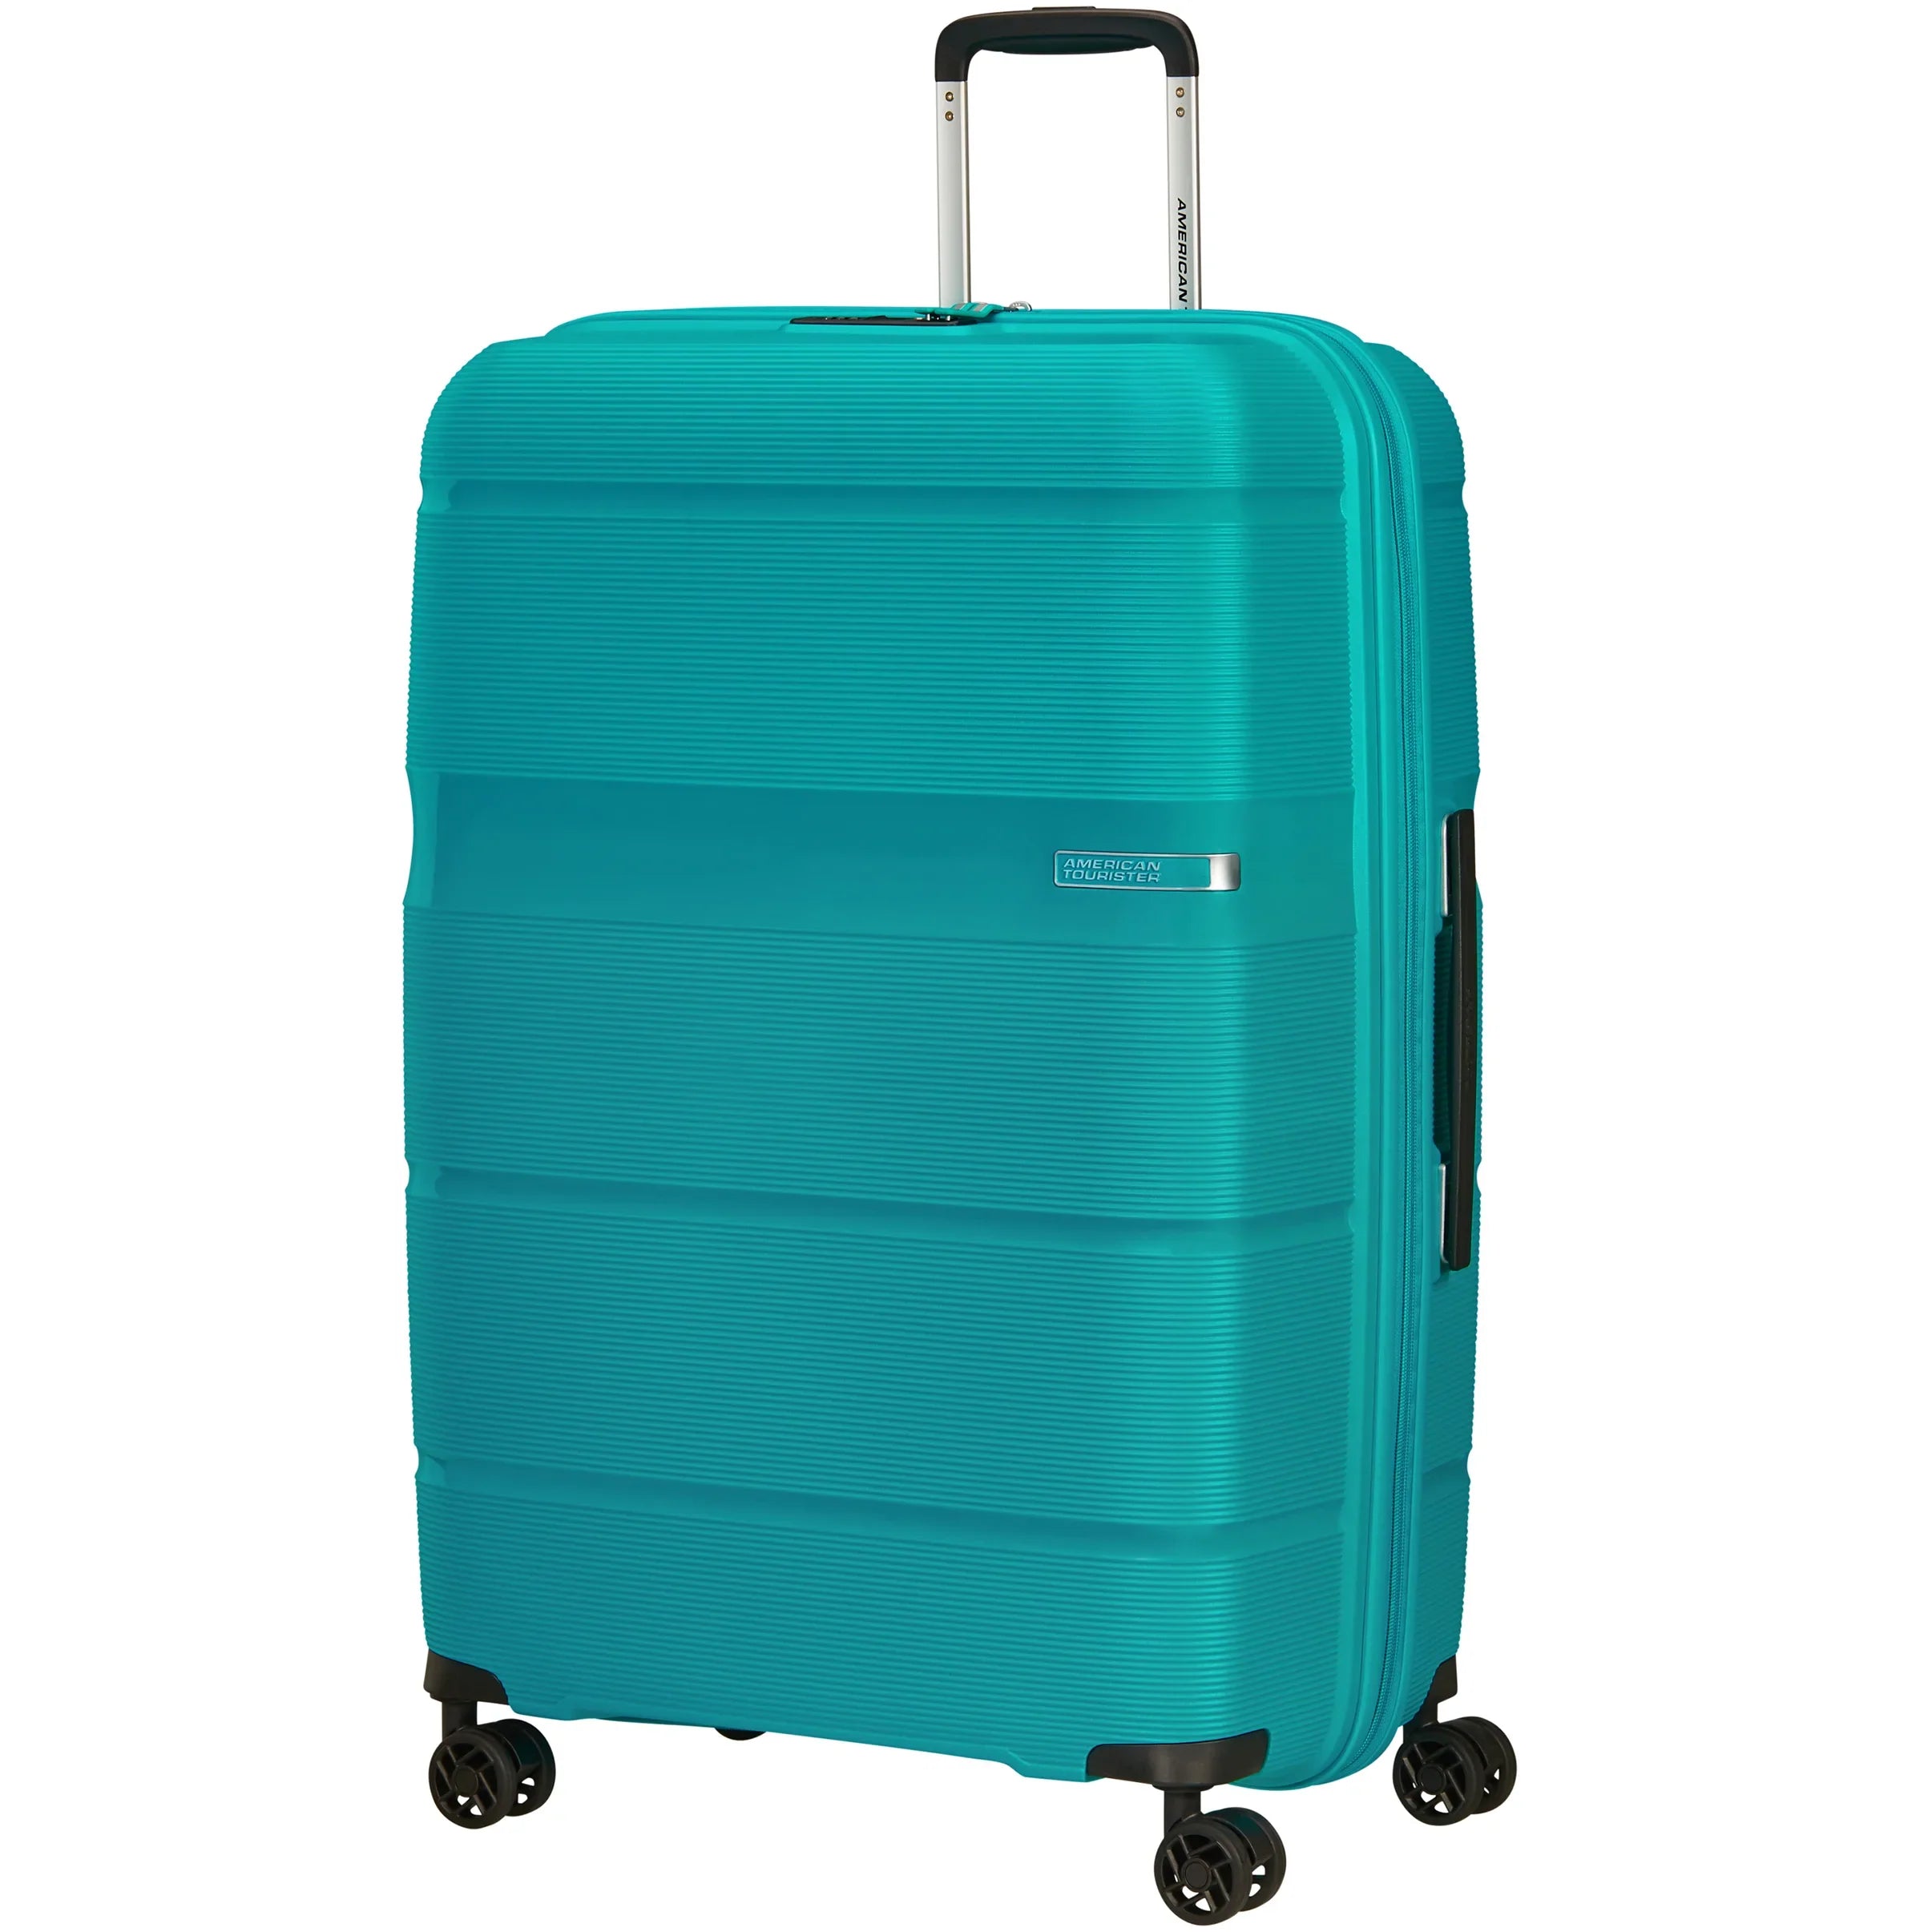 American Tourister Koffer & Trolleys – Seite 5